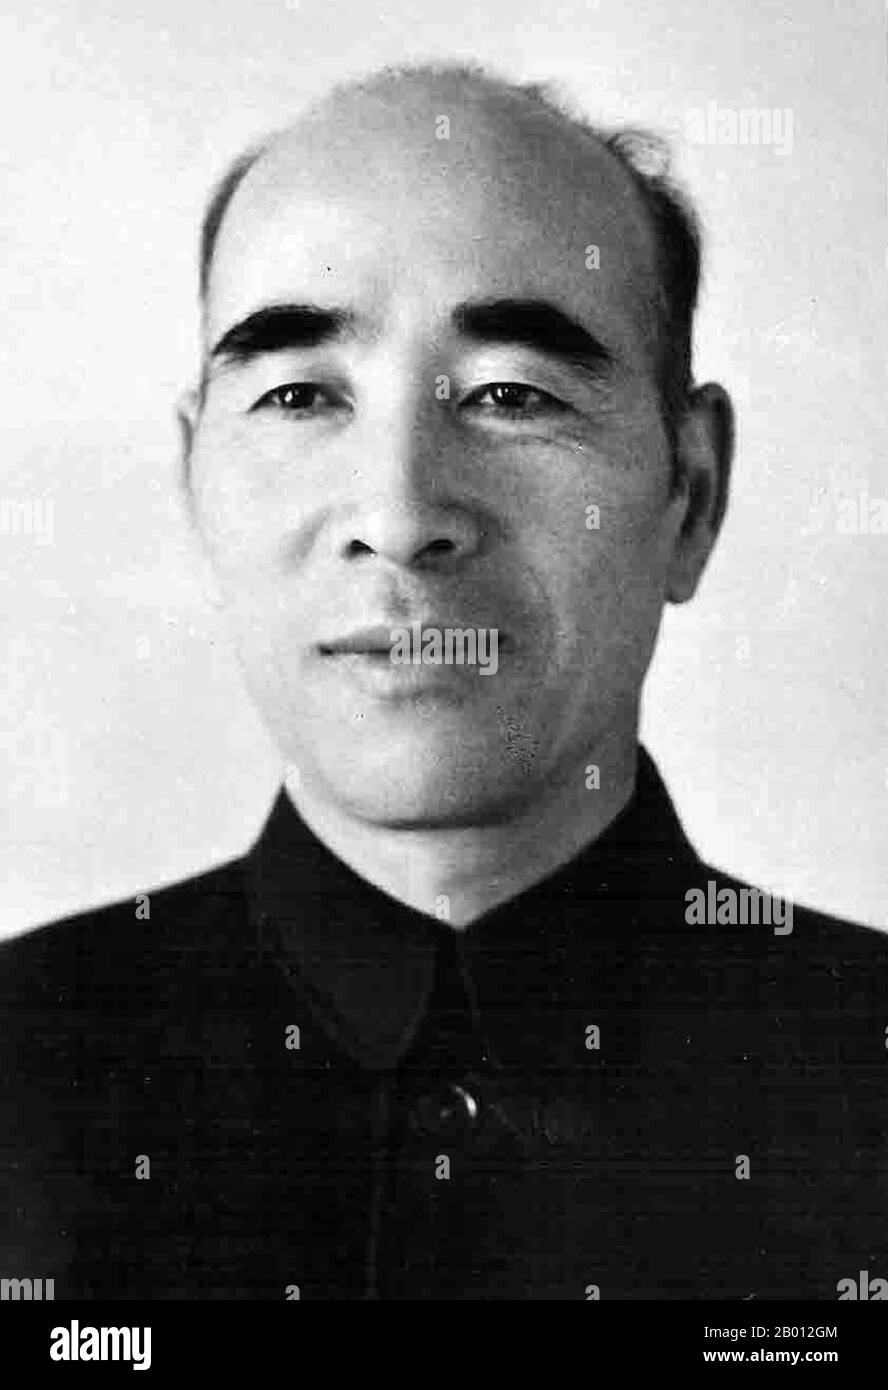 China: Lin Biao (1907-1971) in the mid-1950s.  Lin Yurong, better known by the nom de guerre Lin Biao ( December 5, 1907– September 13, 1971) was a Chinese Communist military leader who was instrumental in the communist victory in the Chinese Civil War, especially in Northeastern China, and was the General who led the People's Liberation Army into Beijing in 1949. He abstained from becoming a major player in politics until he rose to prominence during the Cultural Revolution, climbing as high as second-in-charge and Mao Zedong's designated and constitutional successor. Stock Photo